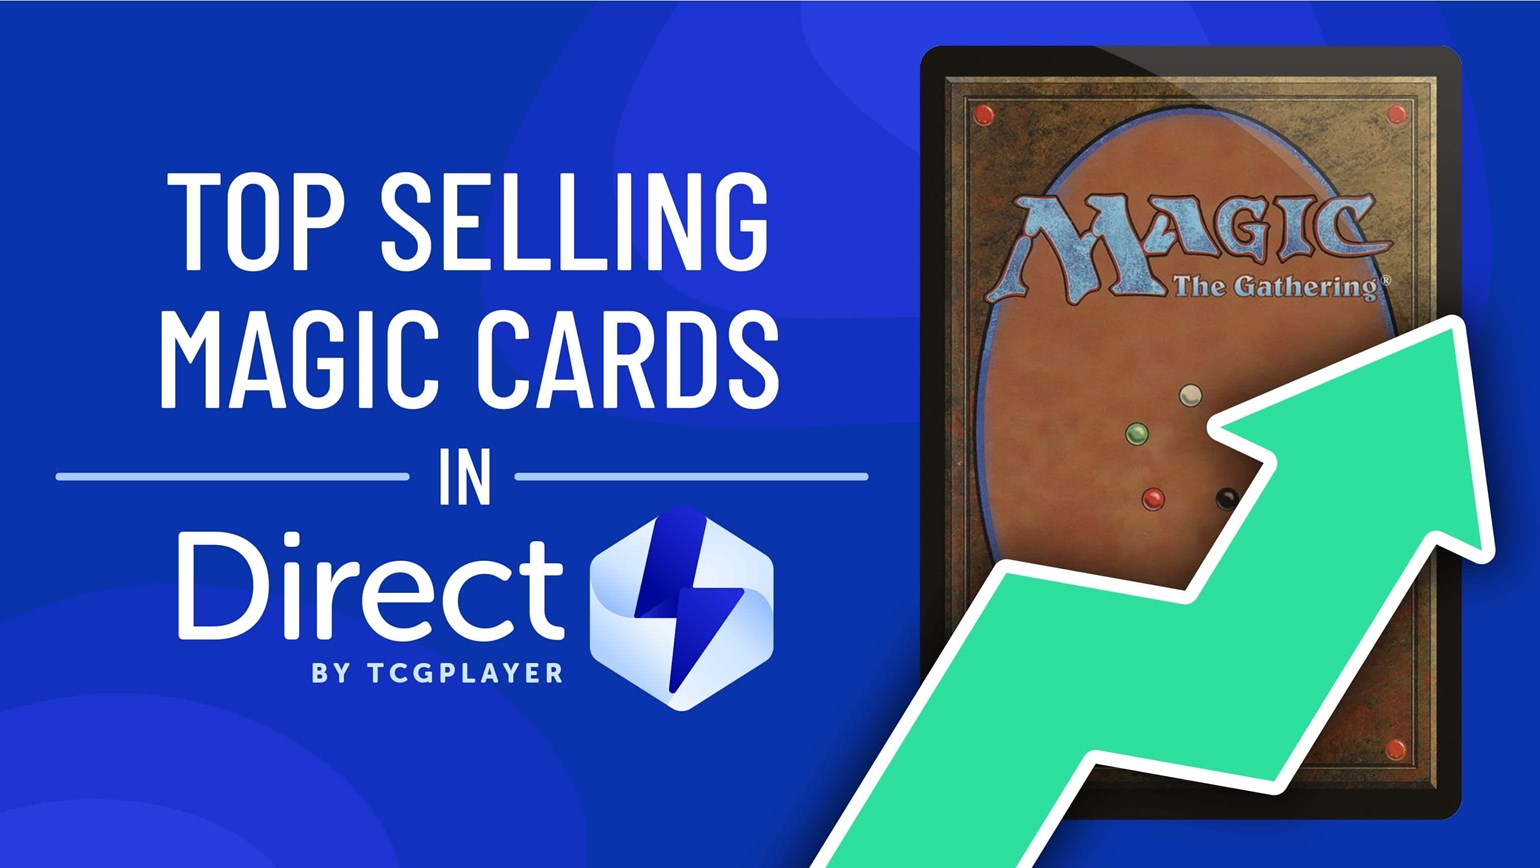 March 2022 Top Selling Magic: The Gathering Cards in Direct by TCGplayer